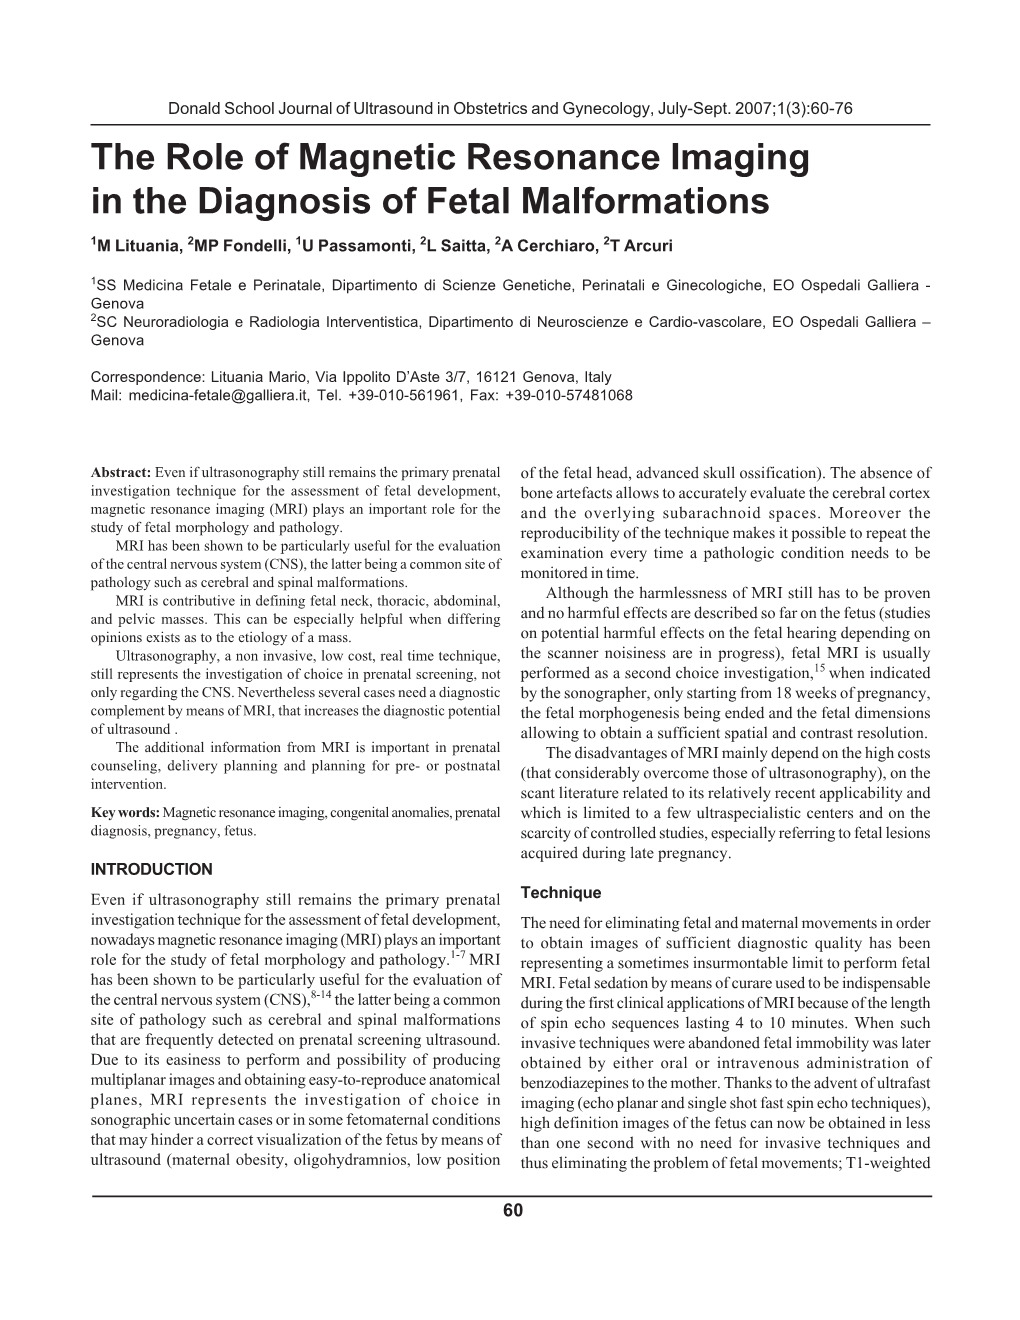 The Role of Magnetic Resonance Imaging in the Diagnosis of Fetal Malformations